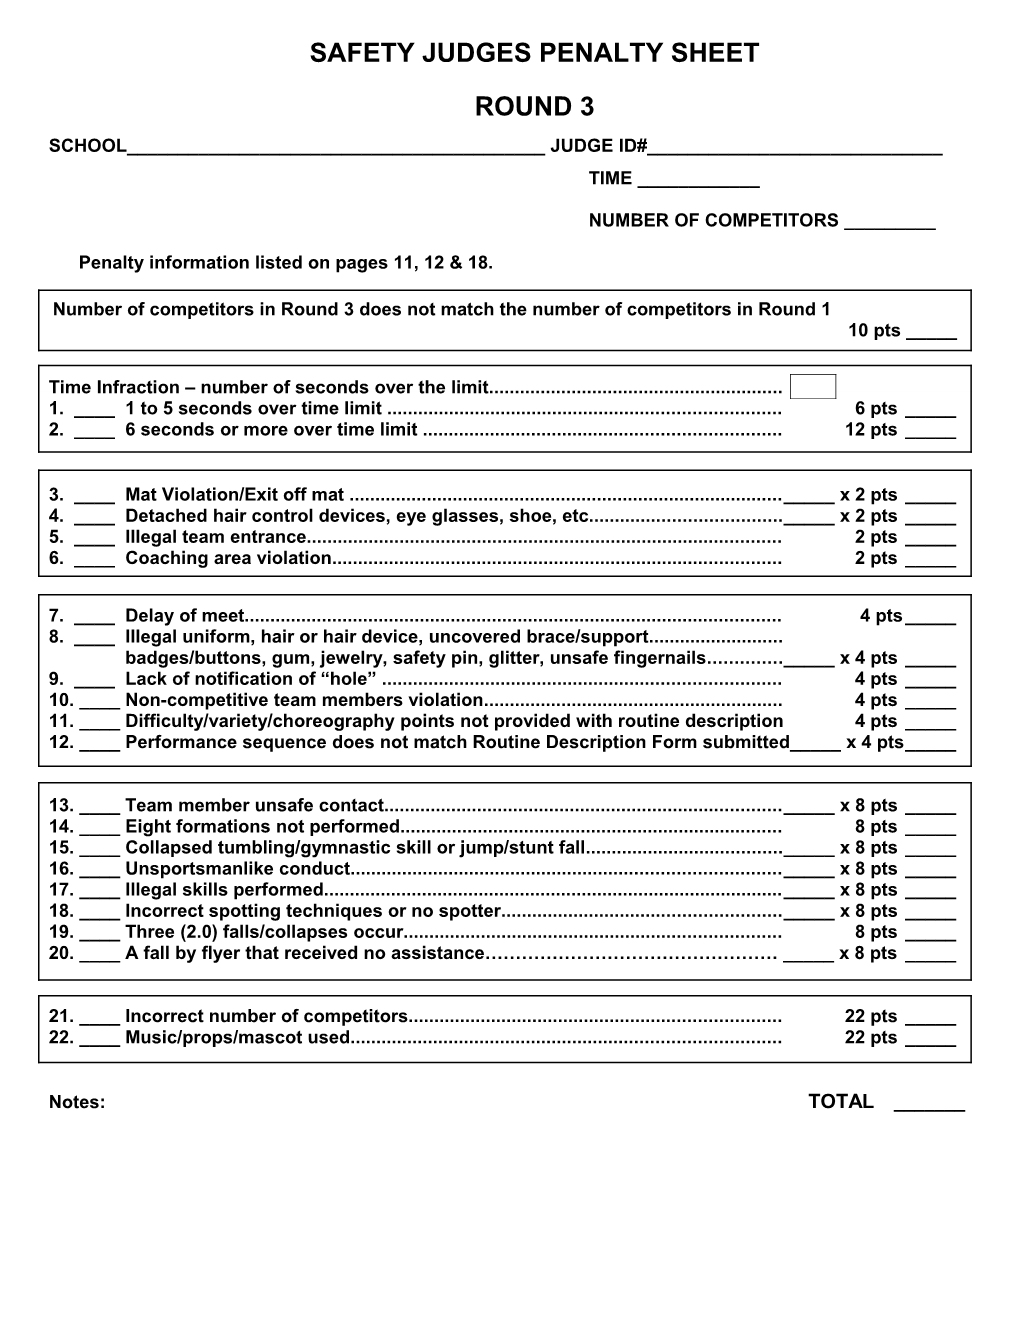 Safety Judges Penalty Sheet